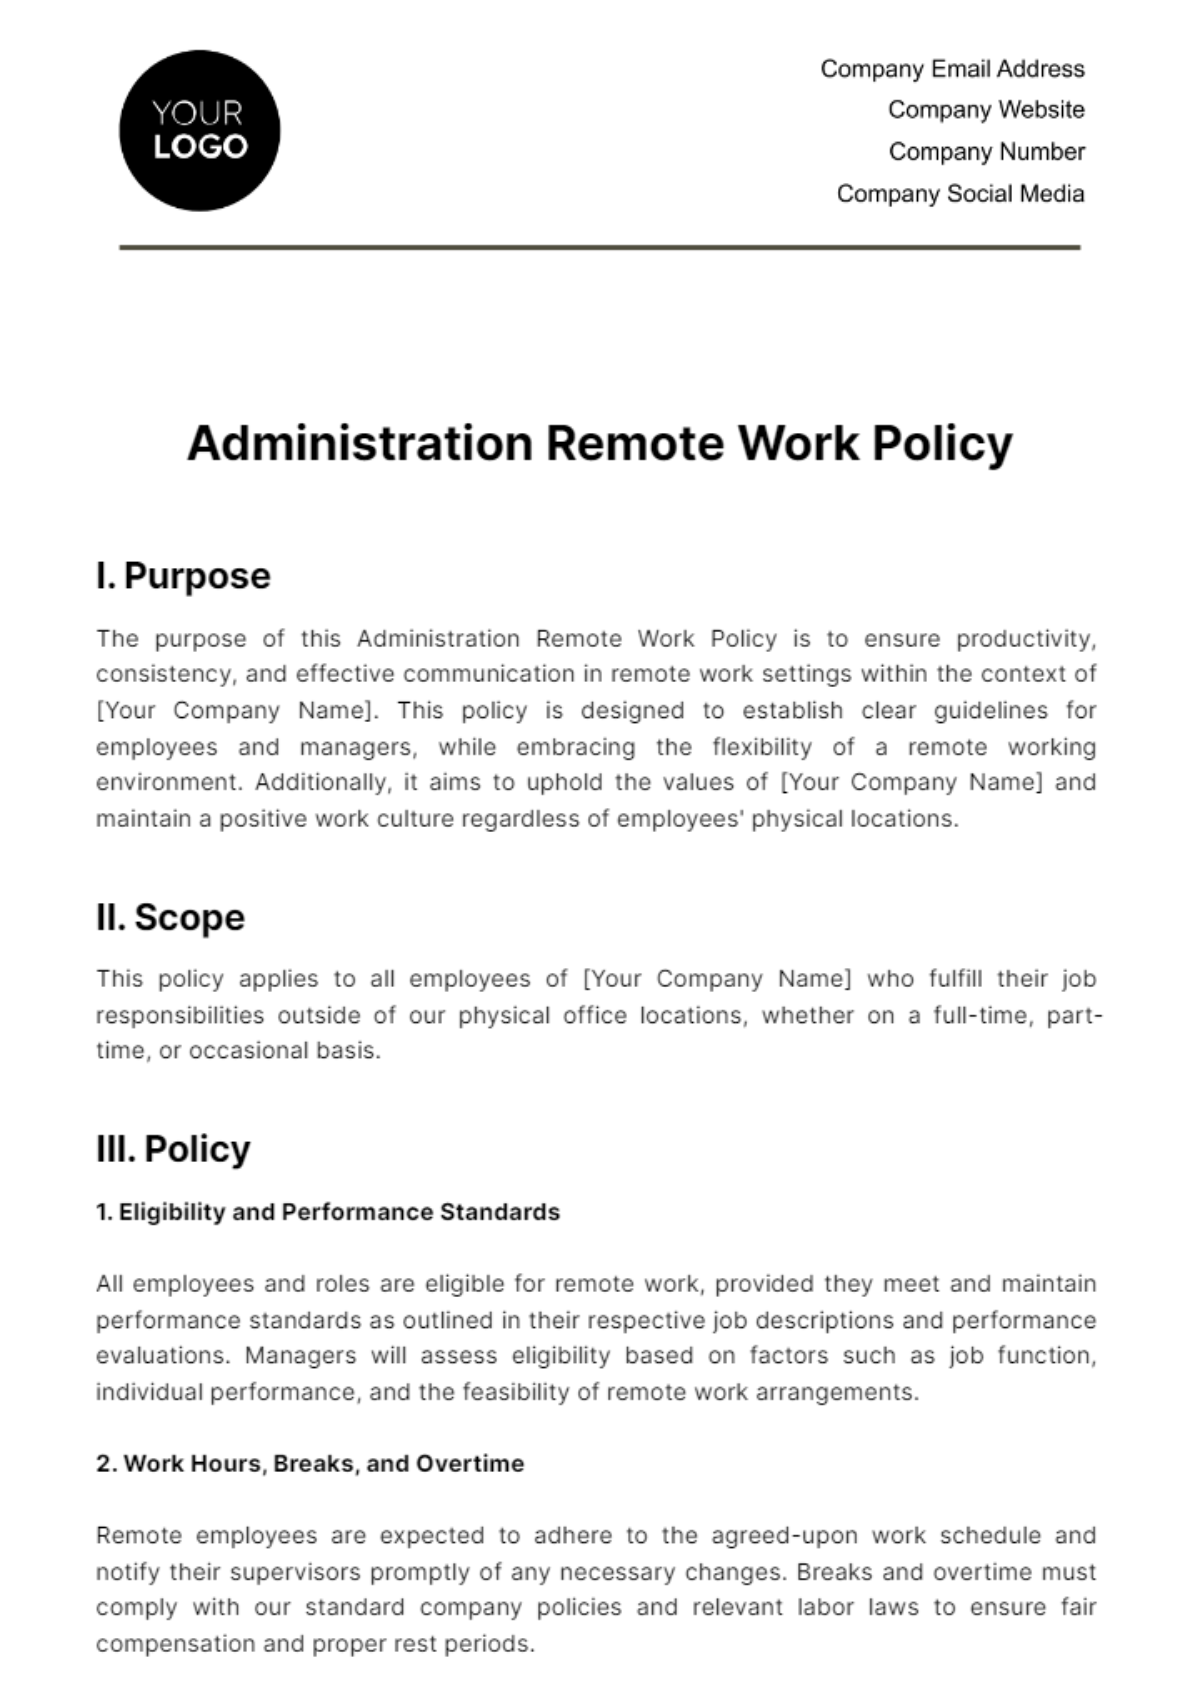 Administration Remote Work Policy Template